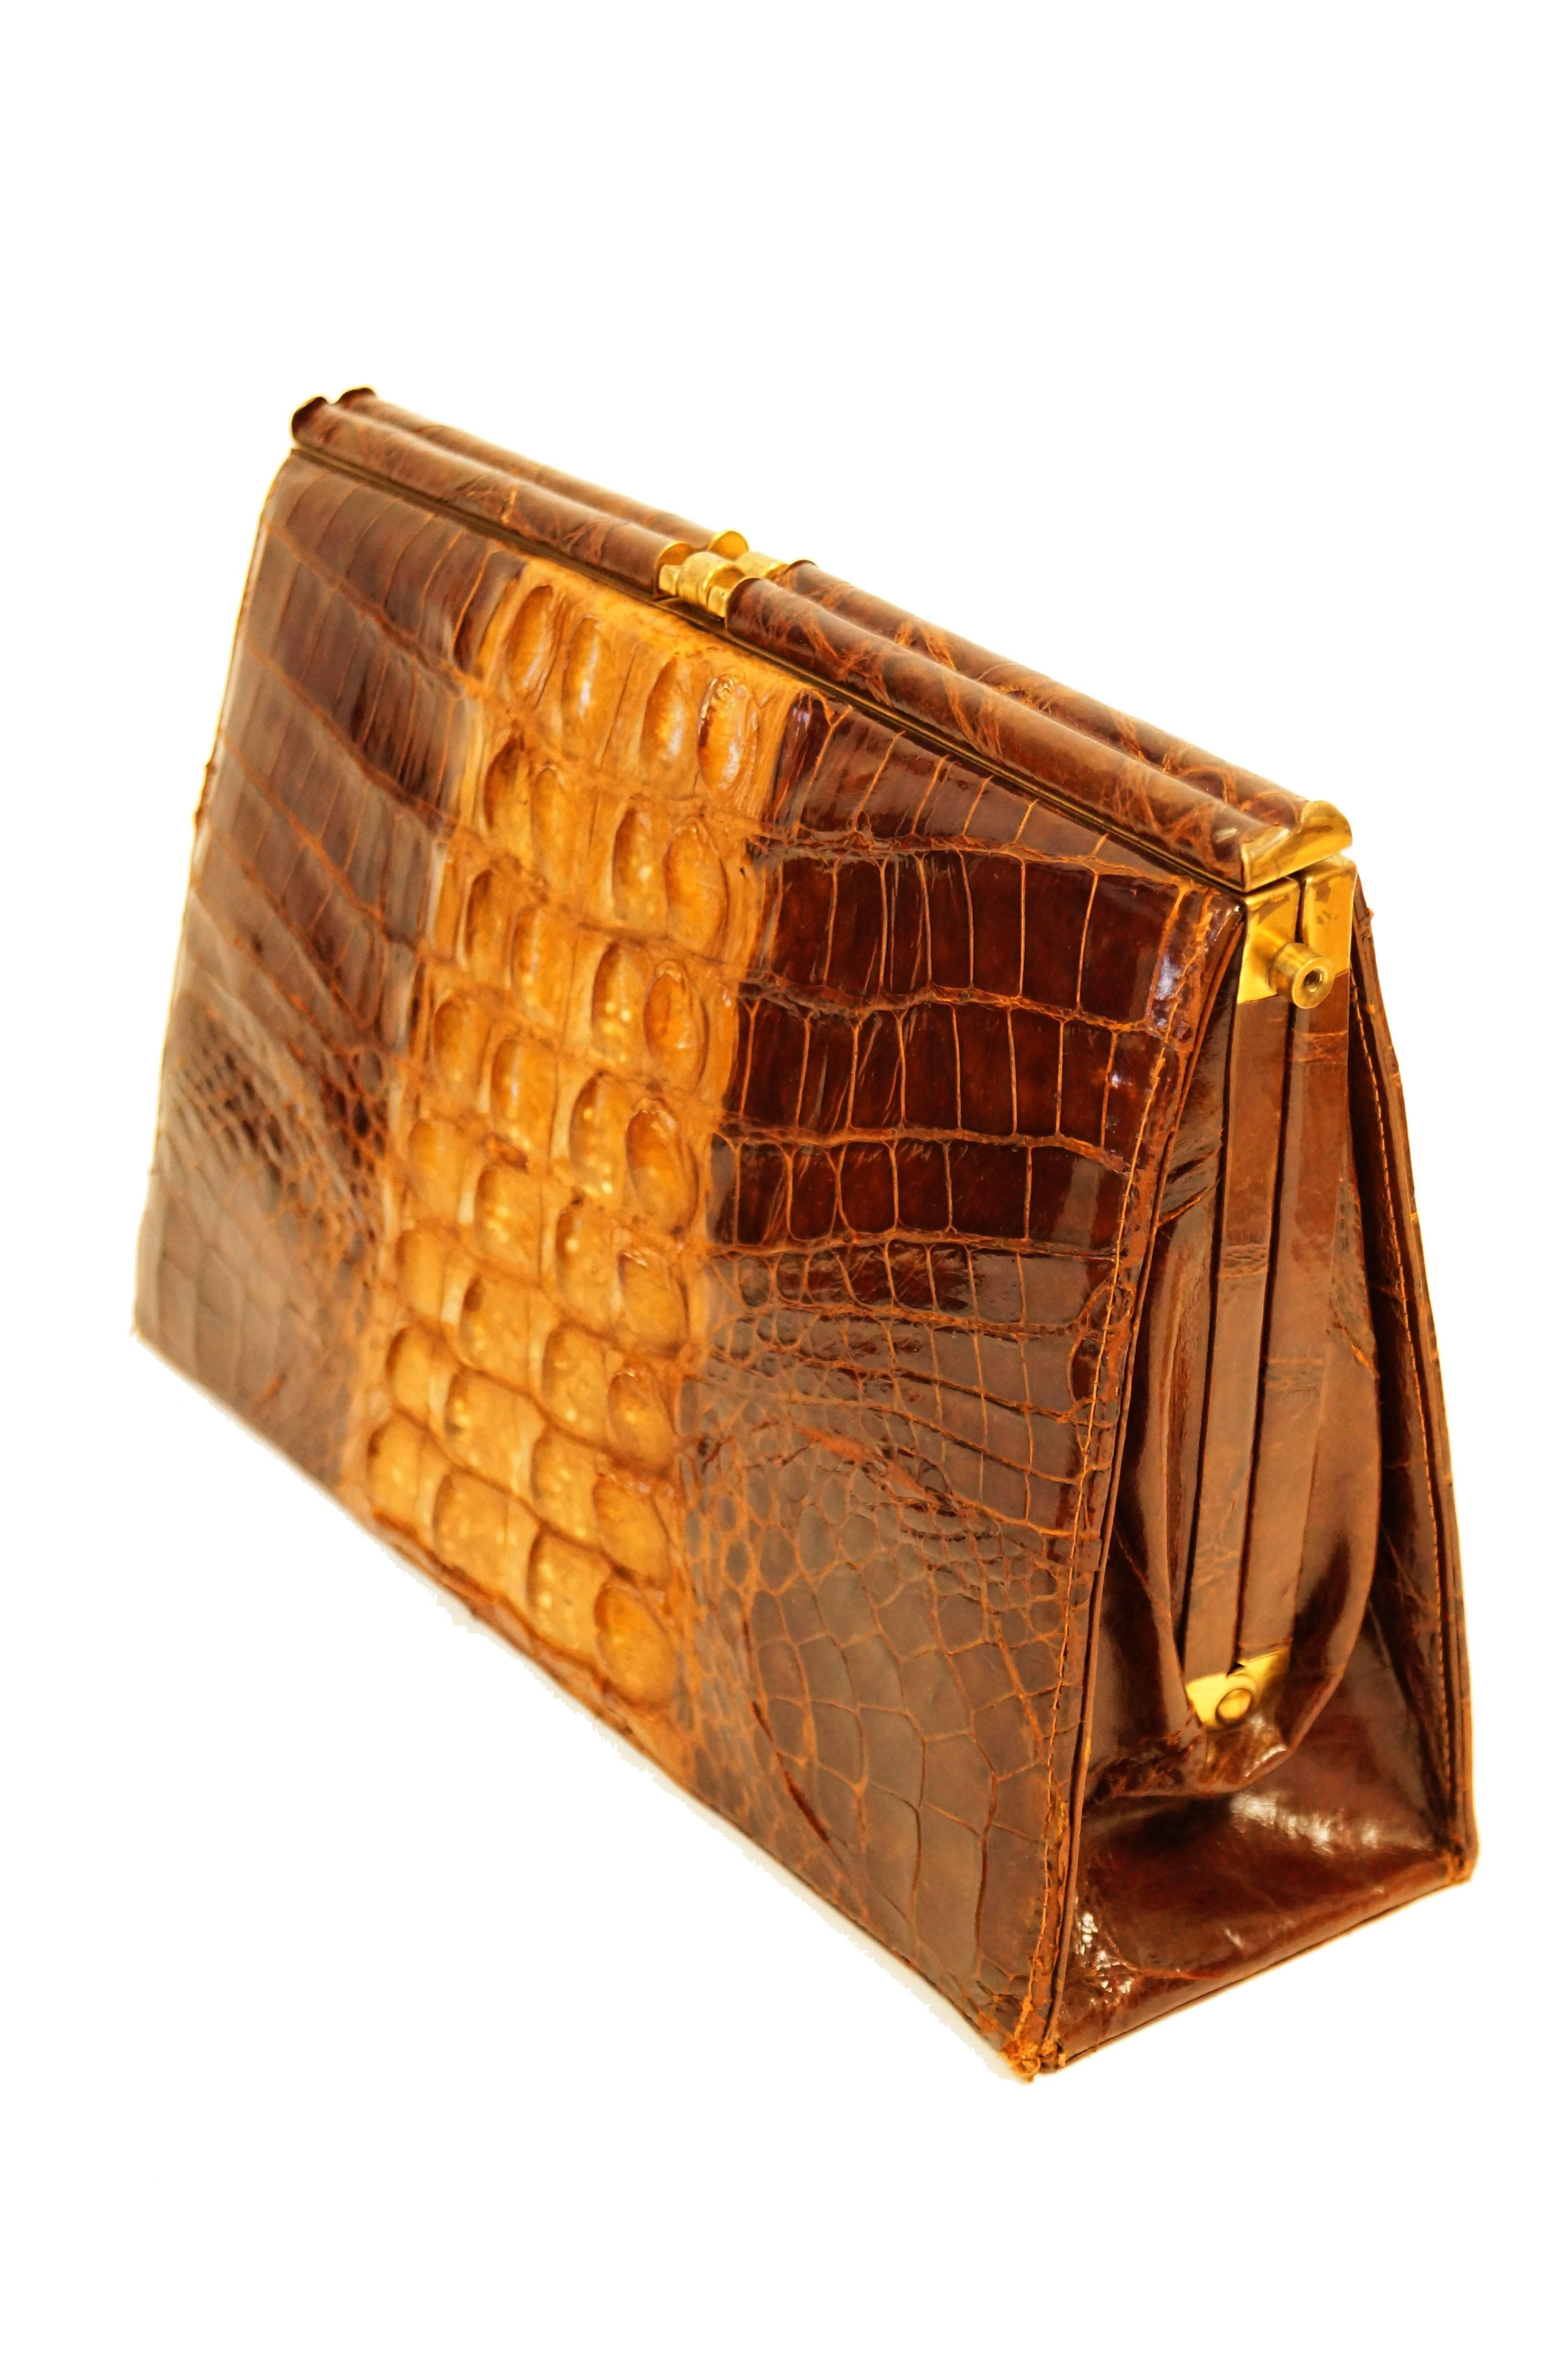 Statement  mid-century A - frame clutch in honey / walnut - tone alligator skin. The clutch has a center compartment featuring multiple open and zippered pockets. Brown flocked lining.